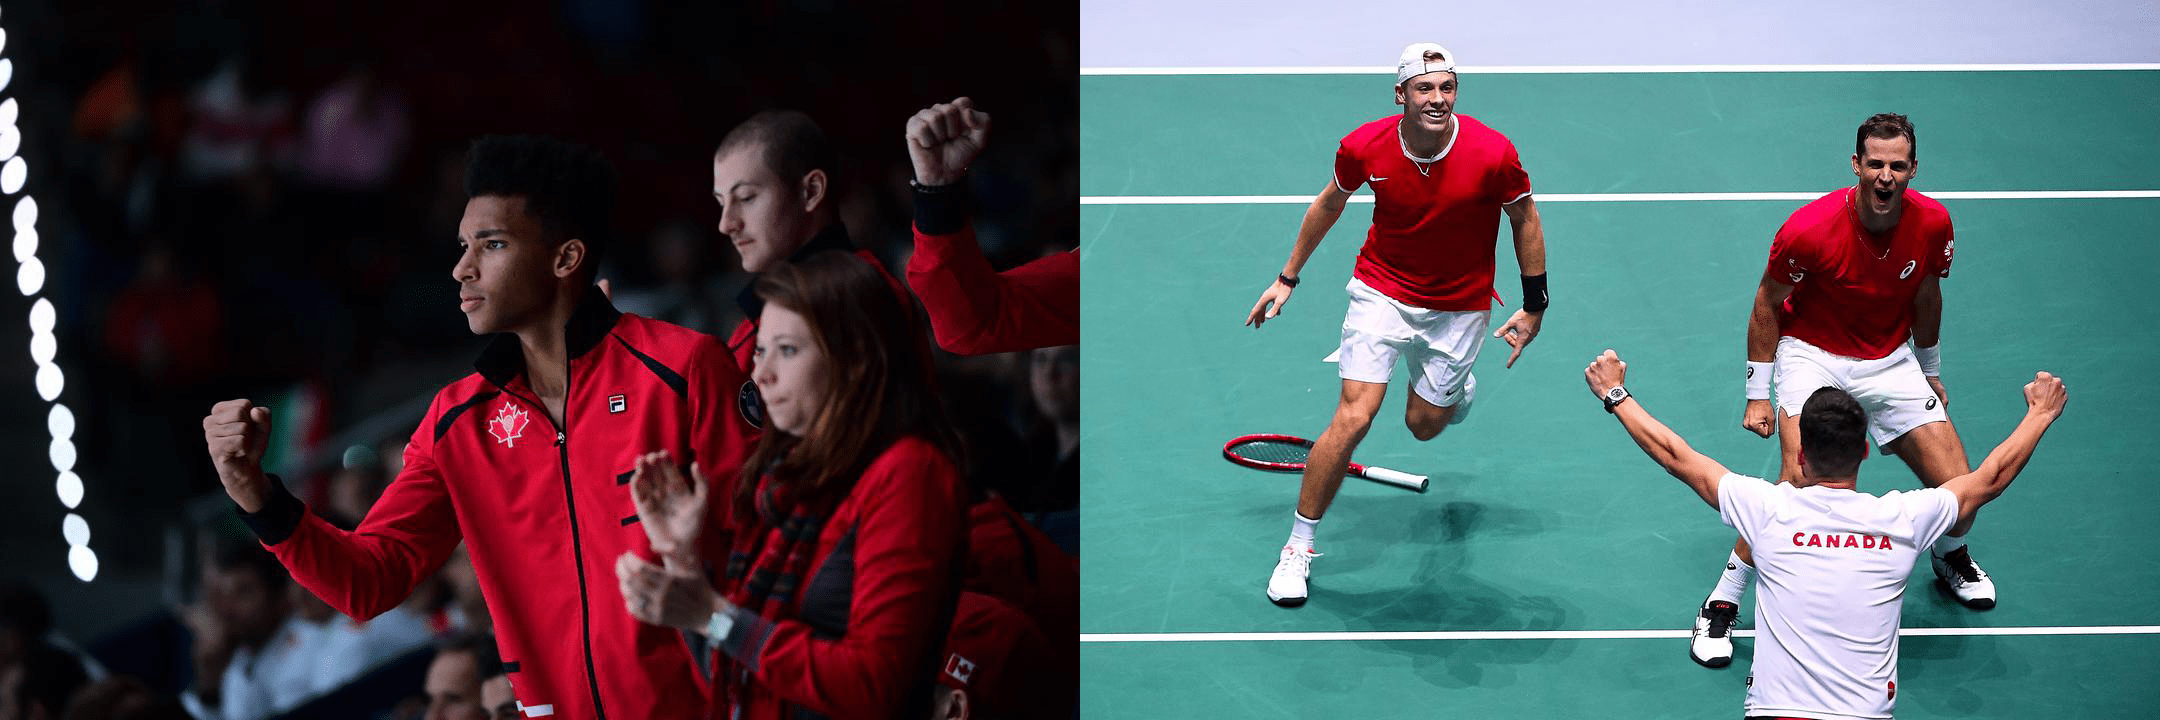 Team Canada had much to celebrate at the 2019 Davis Cup Finals.